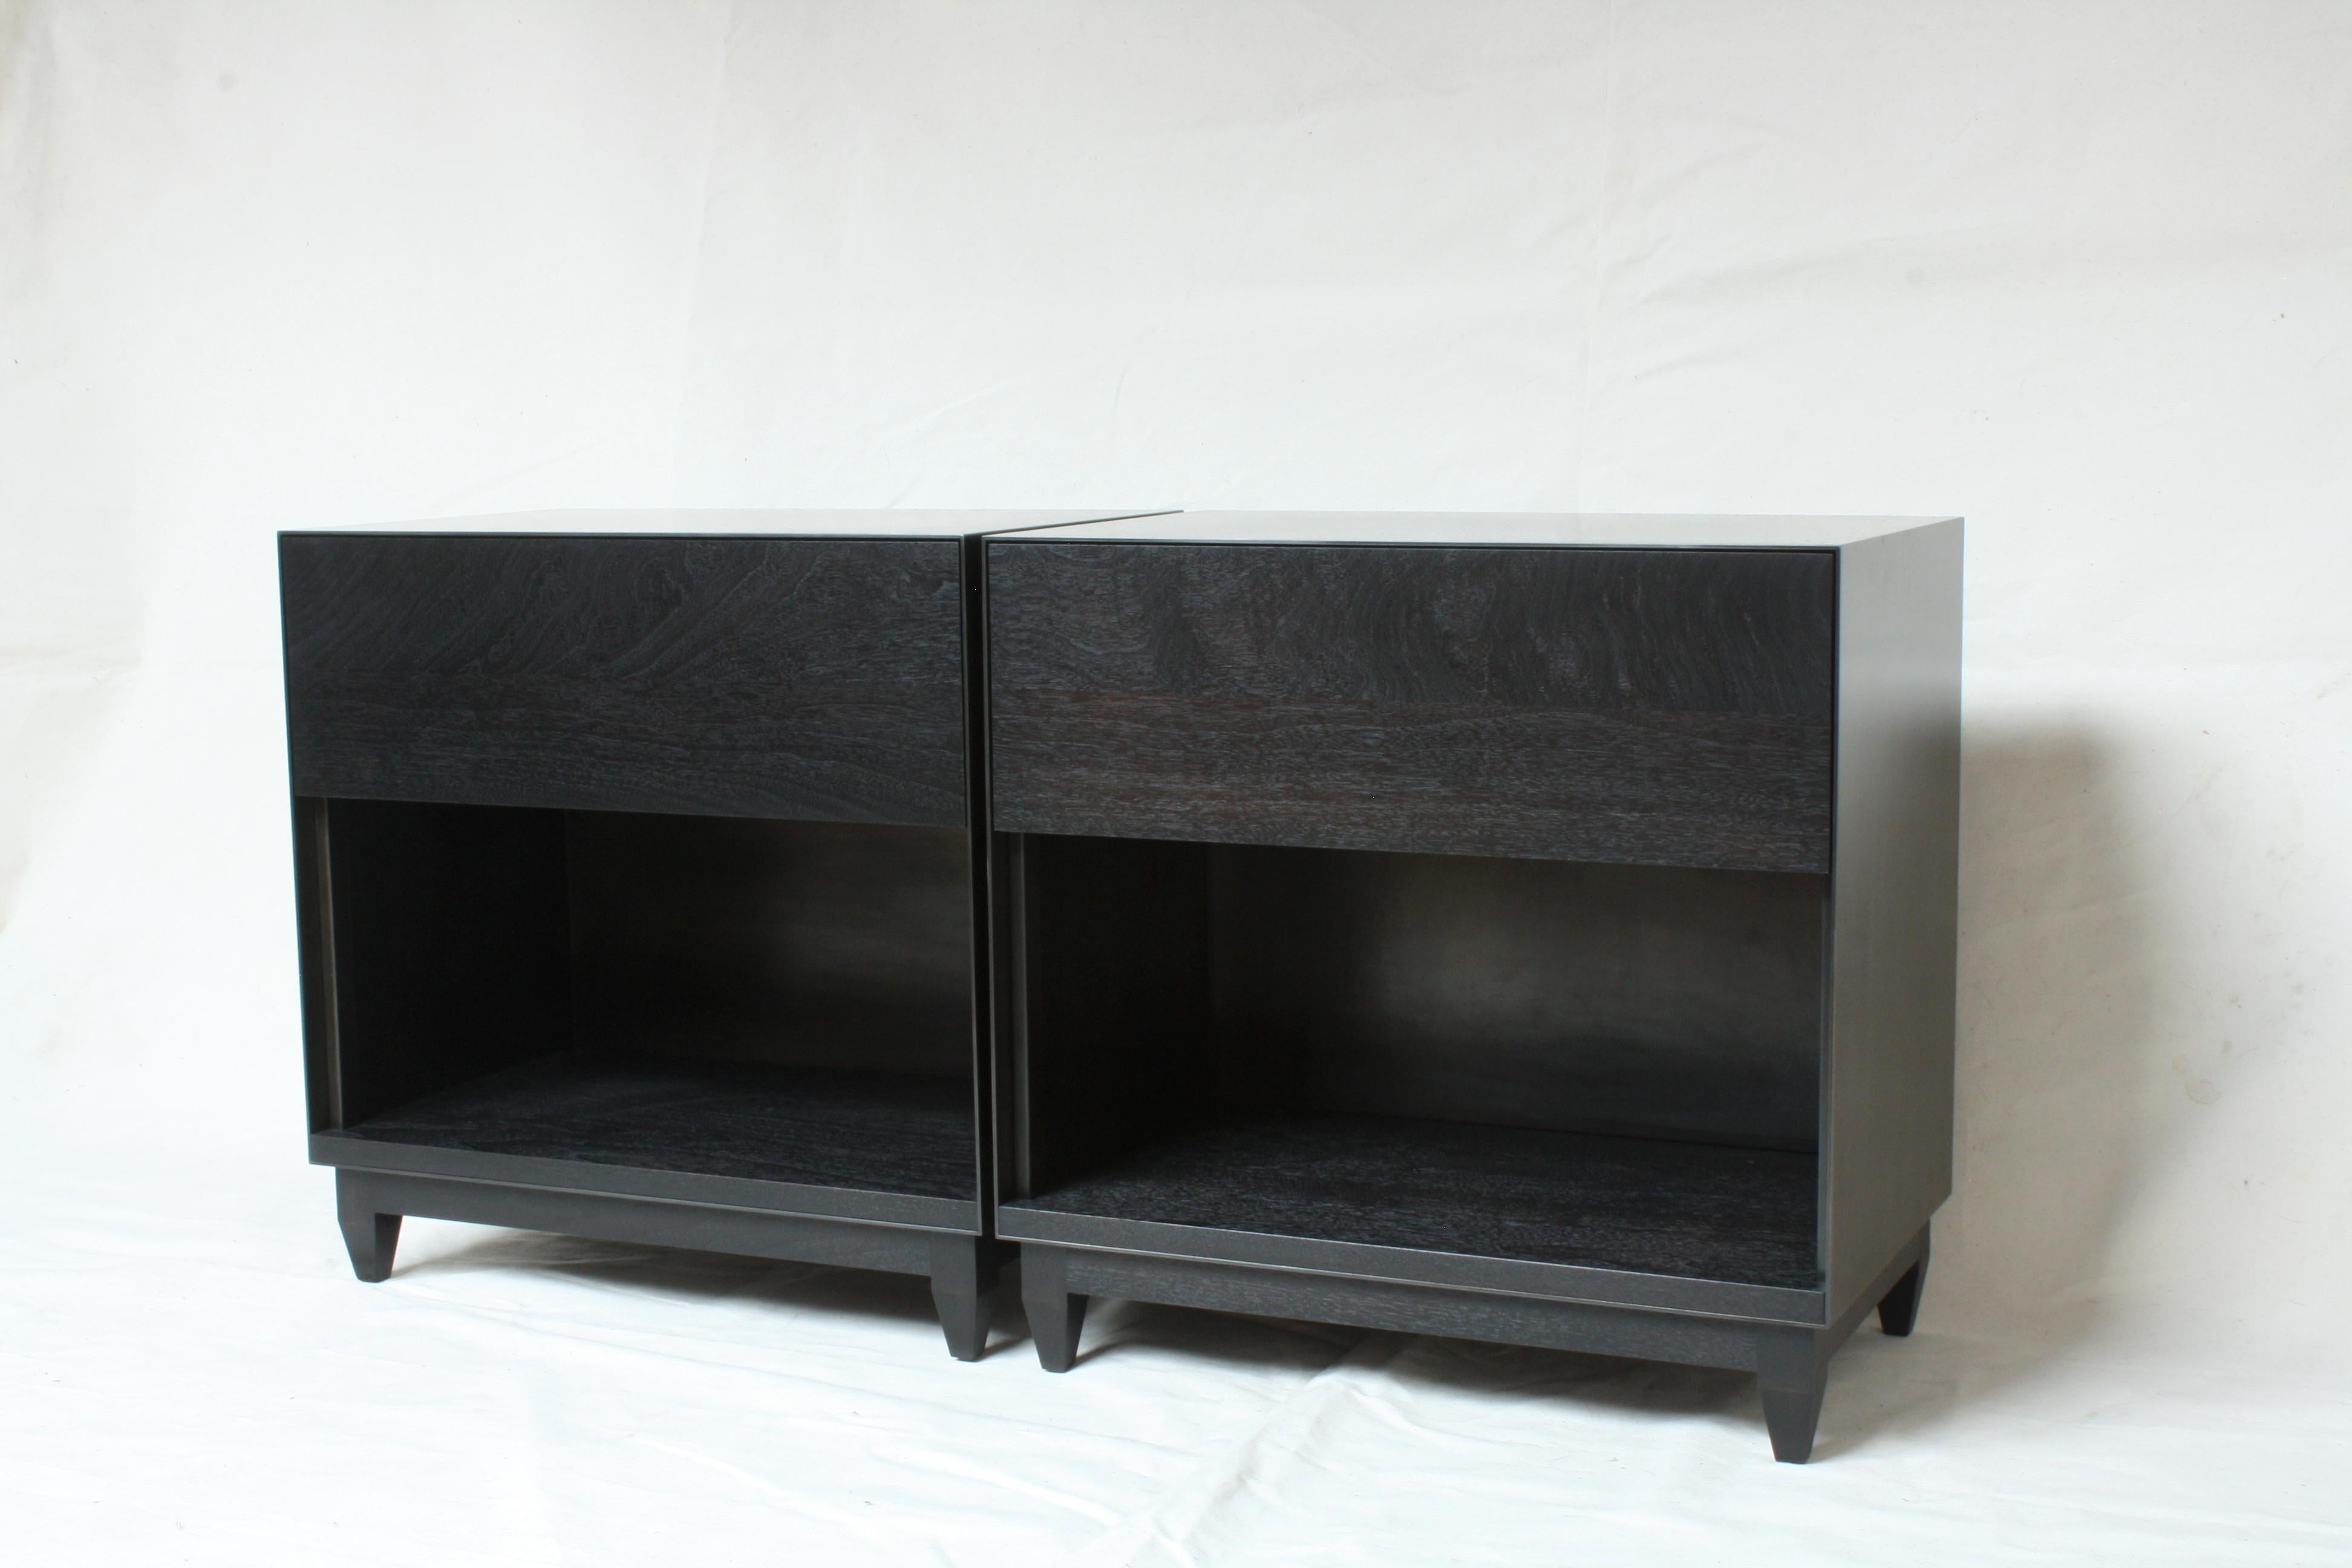 Handmade in Chicago by Laylo Studio, these customizable nightstands or bedside tables feature a blackened steel case and a solid wood interior, drawer front and base. The thin front edge of the seamless metal case frames a drawer front and